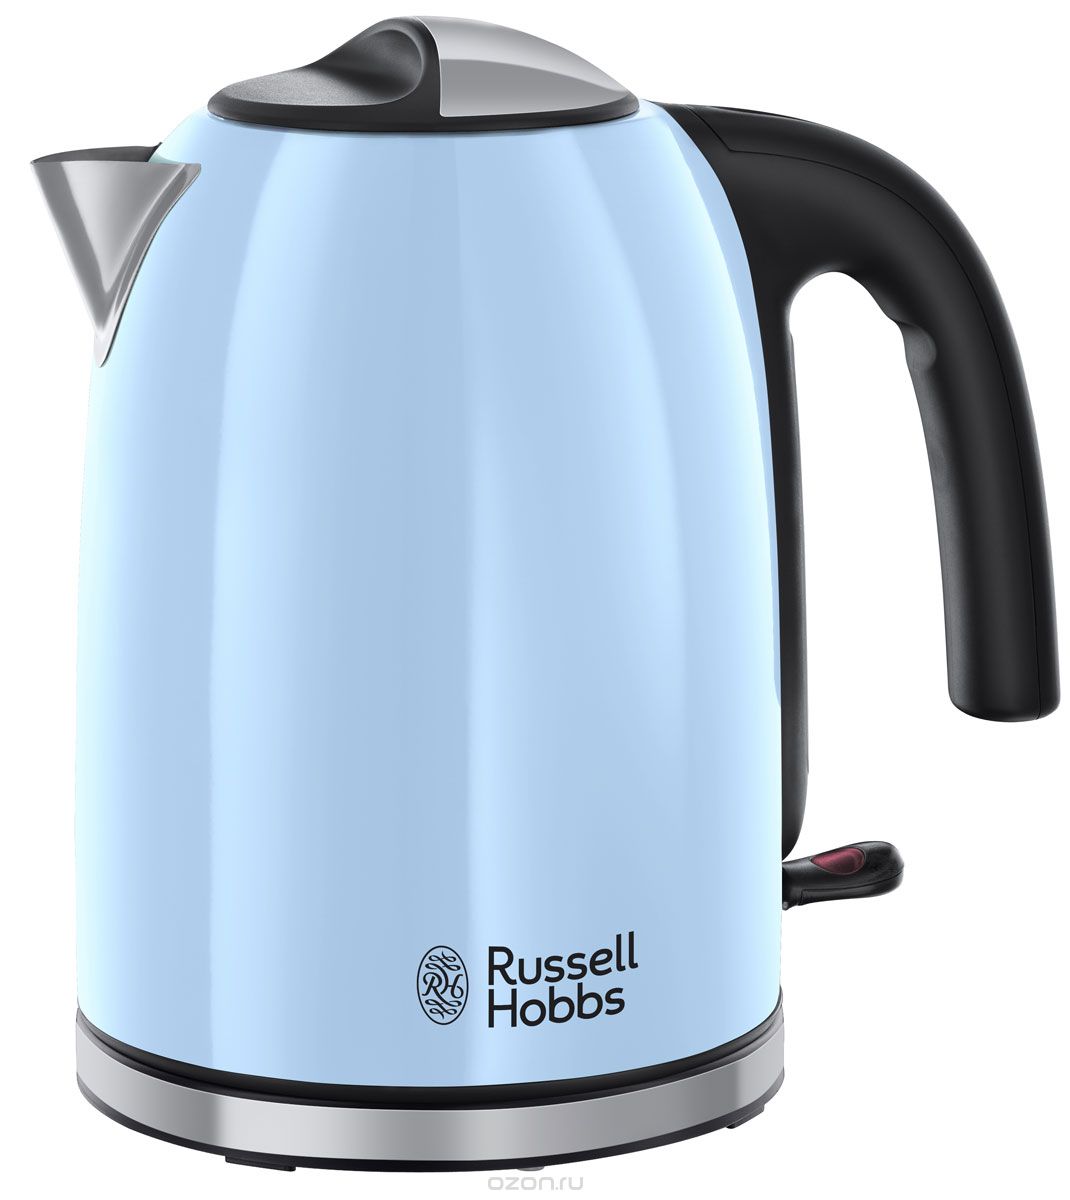   Russell Hobbs Colours Plus, 20417-70, eavenly Blue